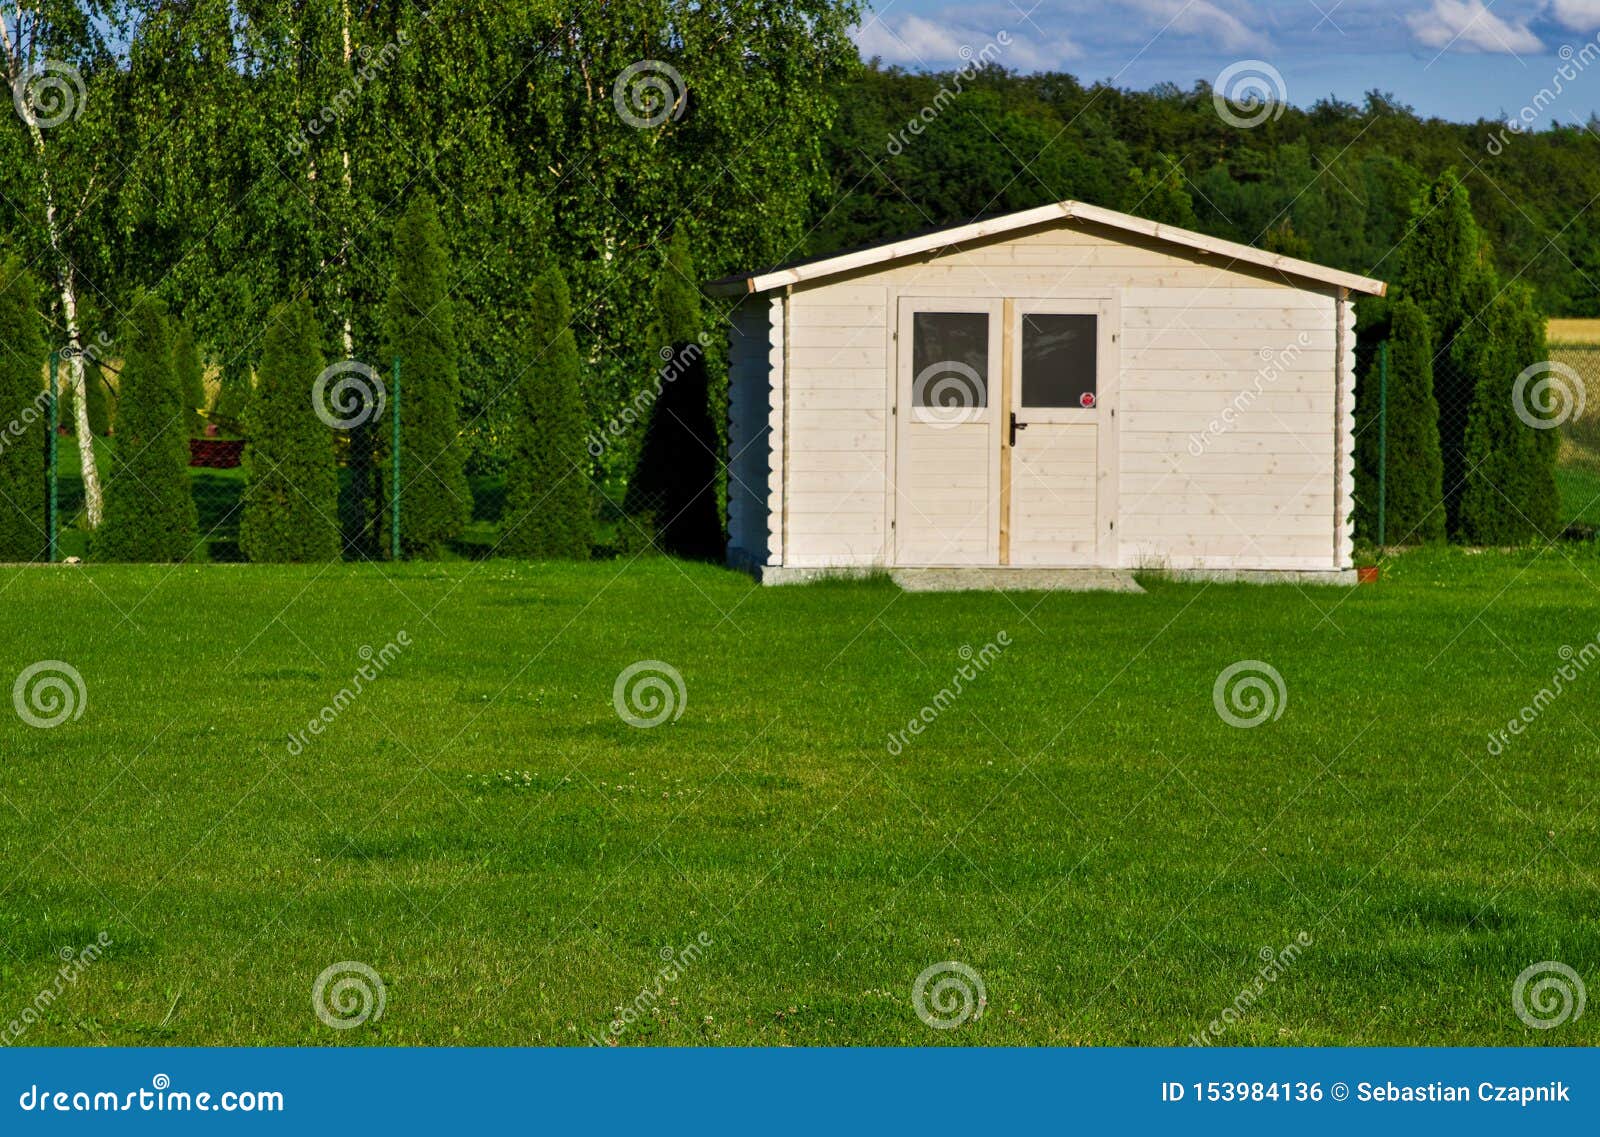 new garden house or shed in green lawn or grass